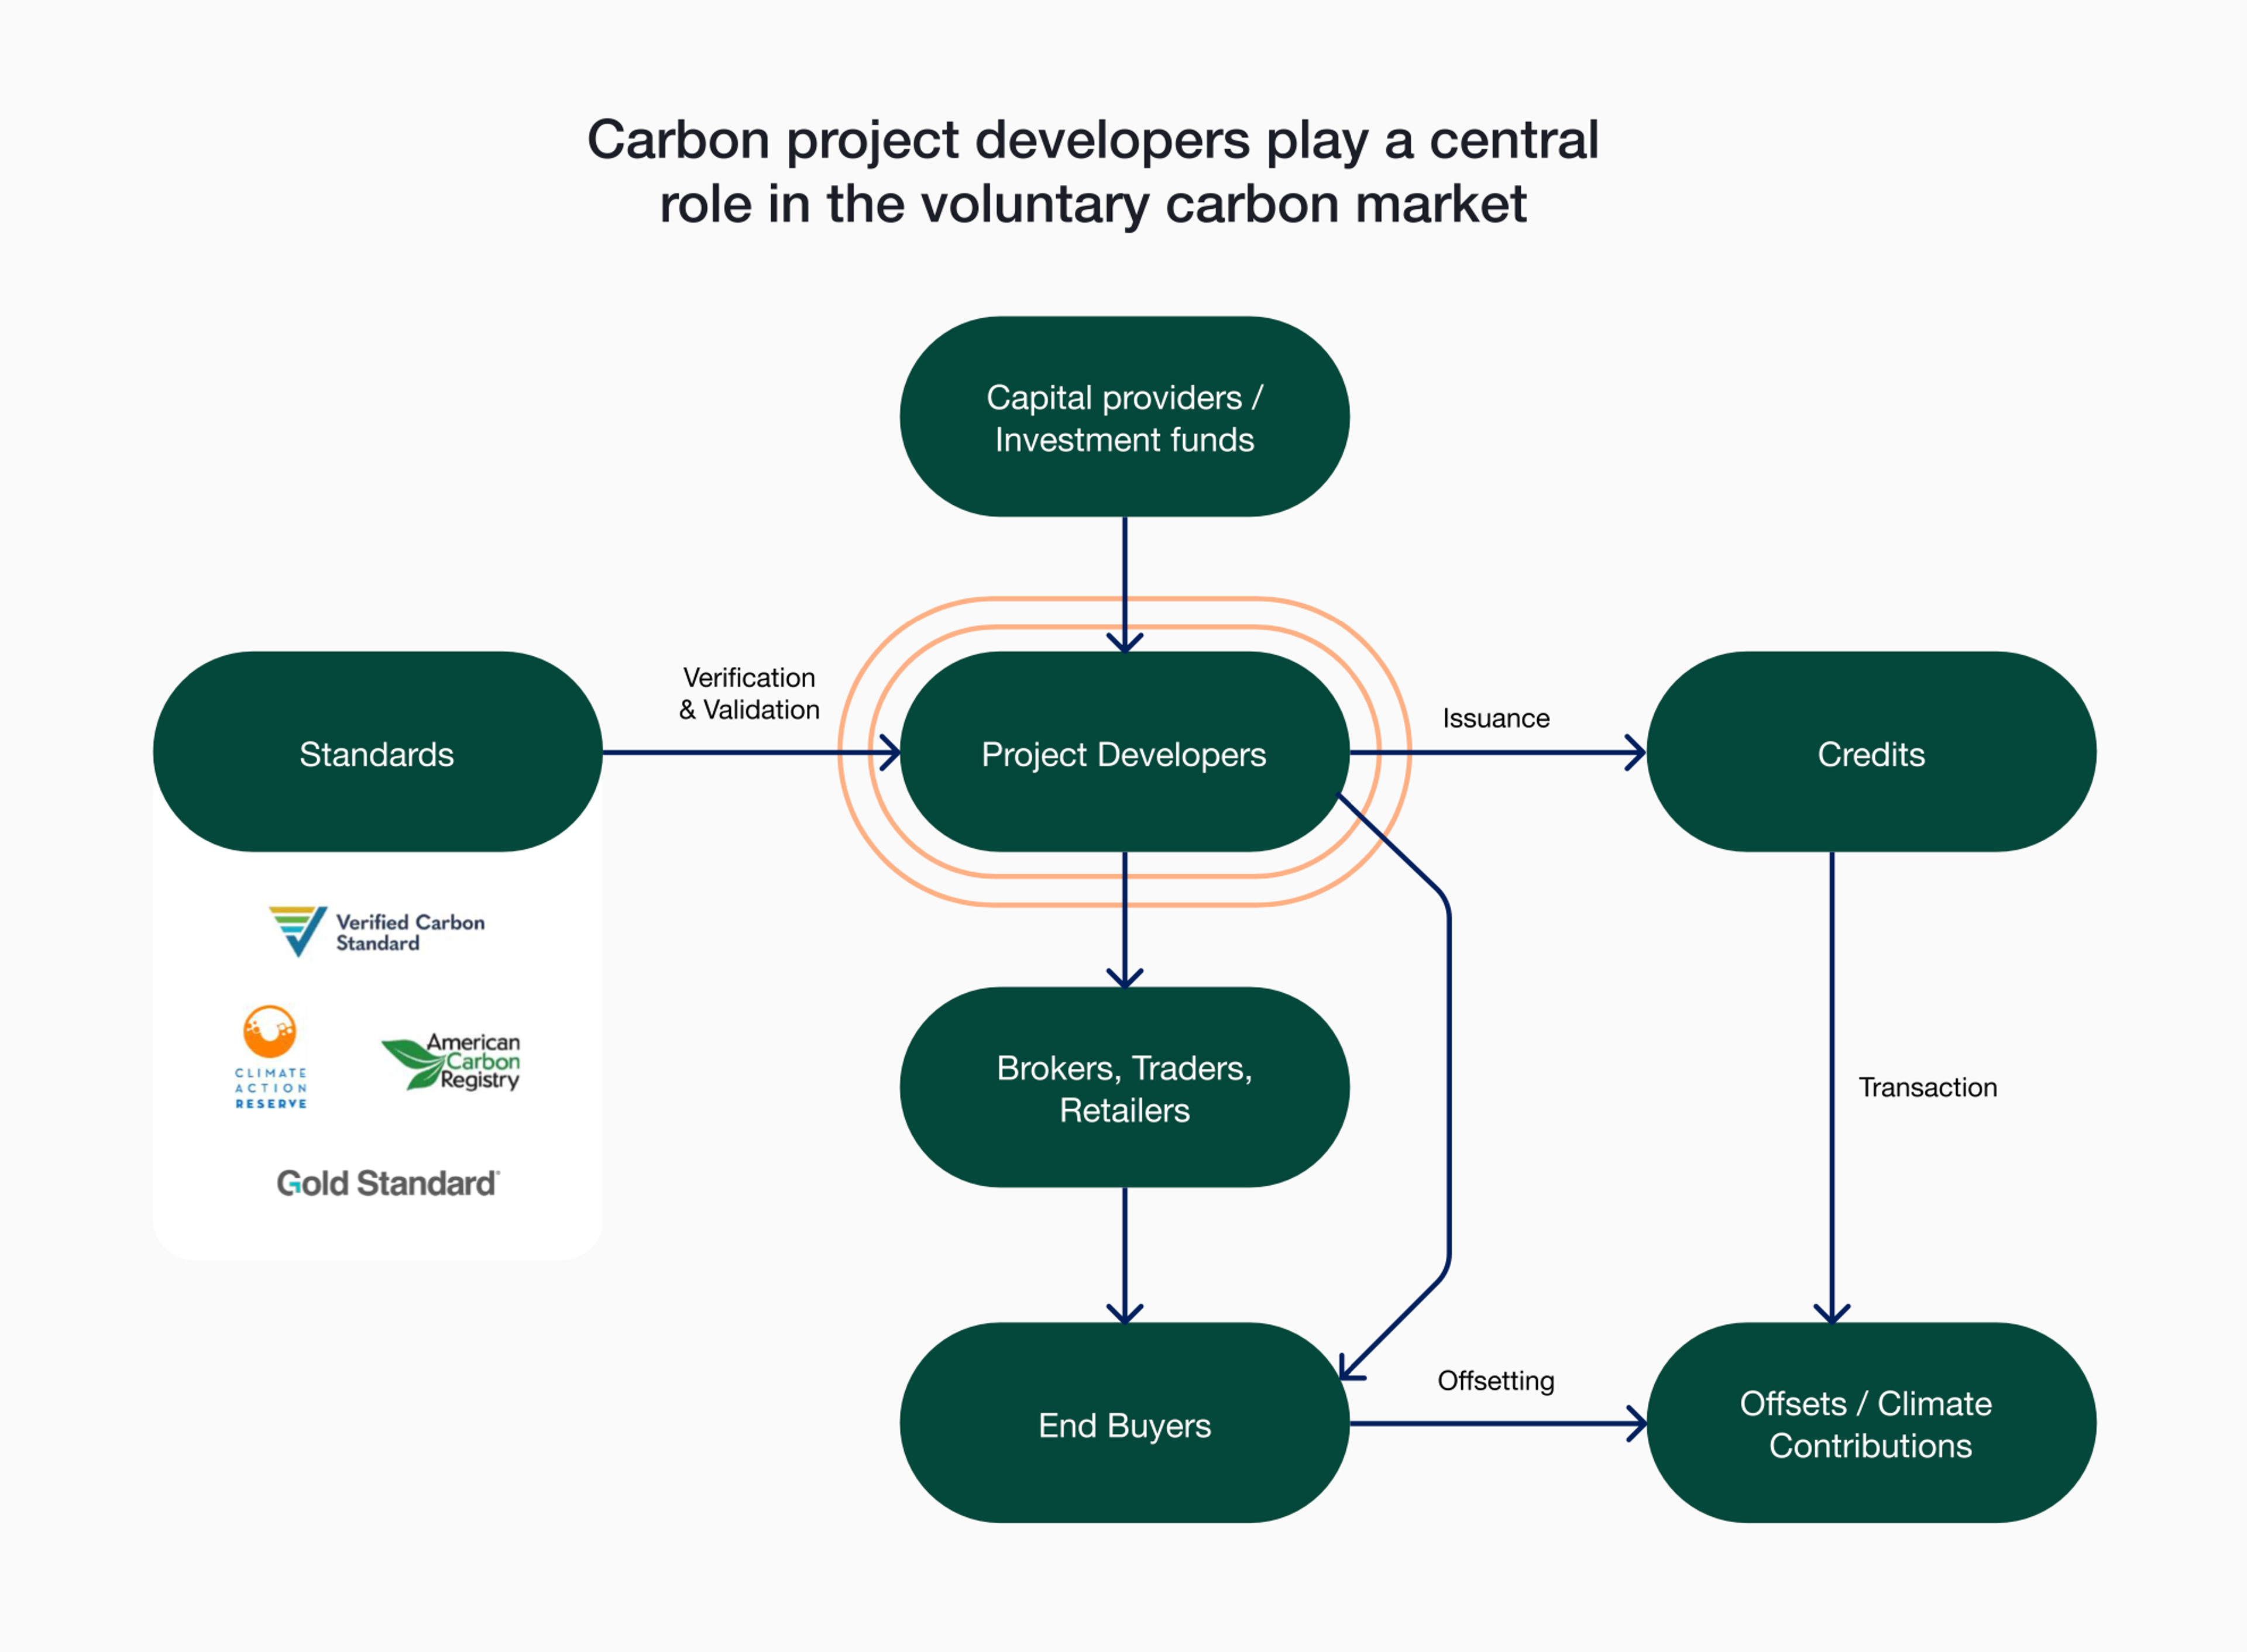 Structure of the Voluntary Carbon Market